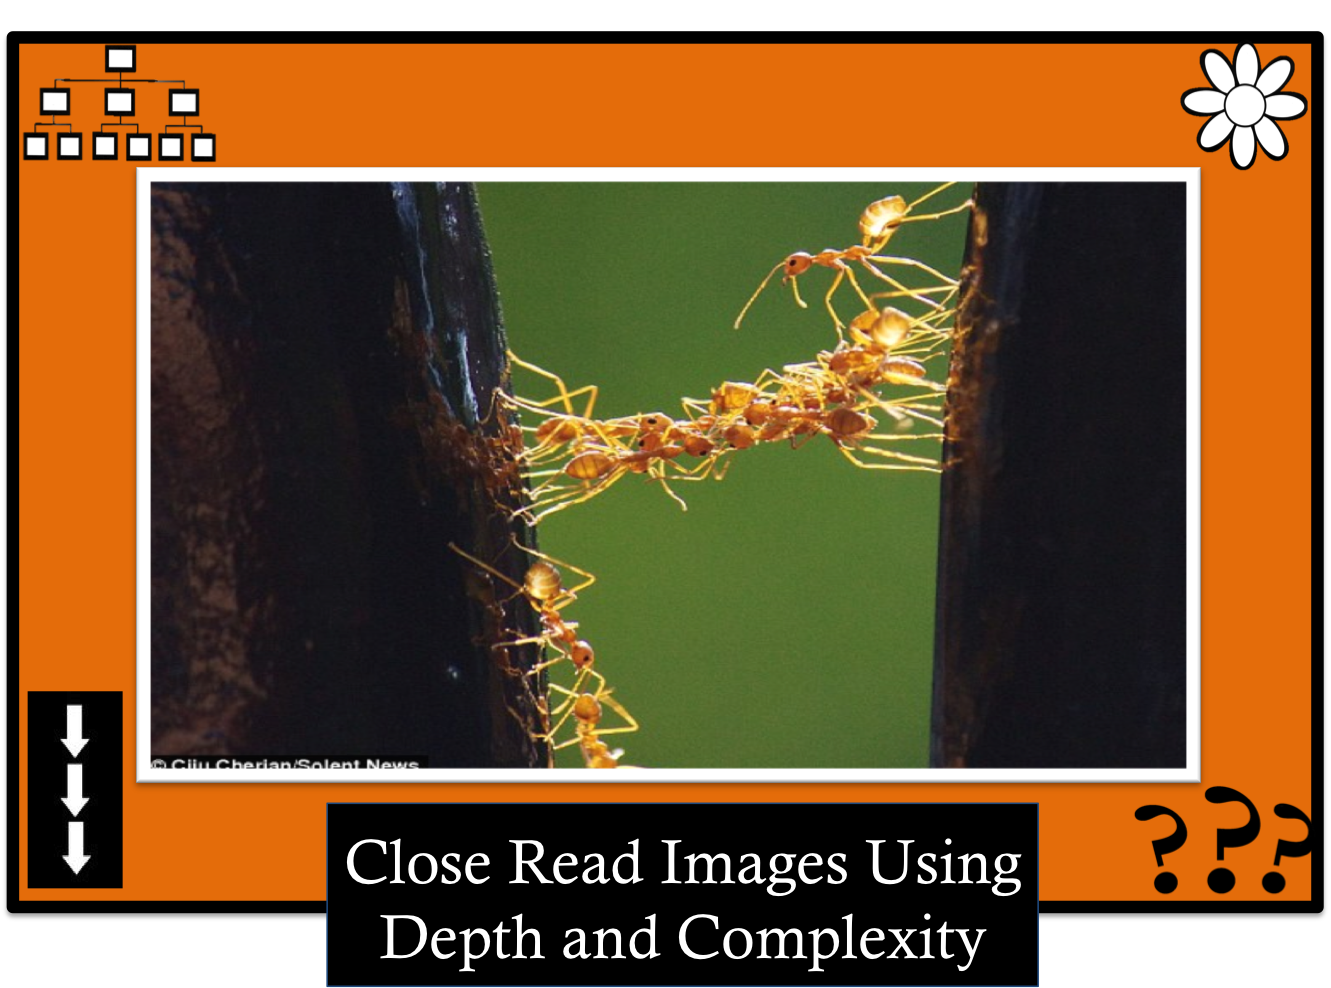 Envision Gifted. Close read image. Ants working together. Close read a image use Depth and complexity.